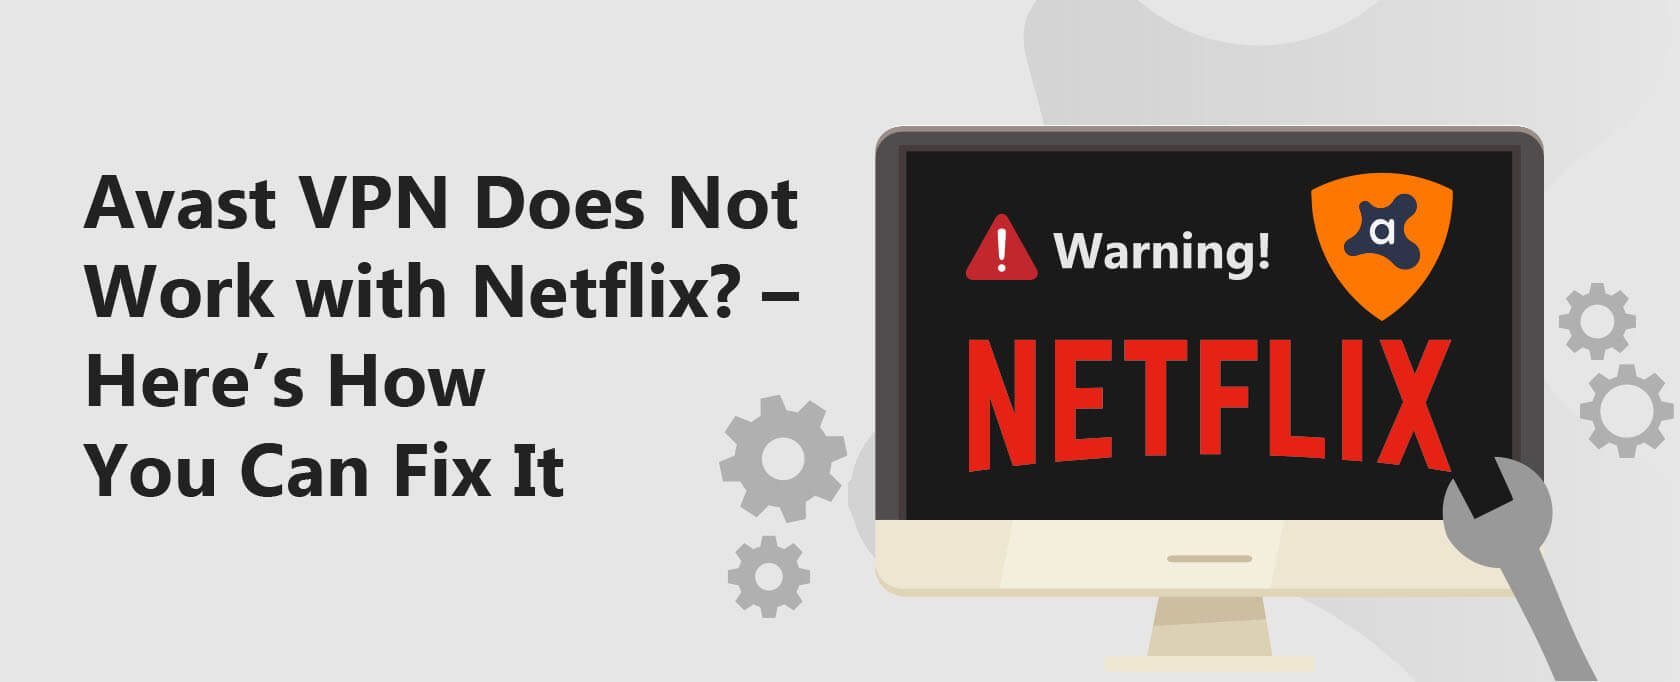 Avast VPN Does Not Work with Netflix? – Here’s How You Can Fix It